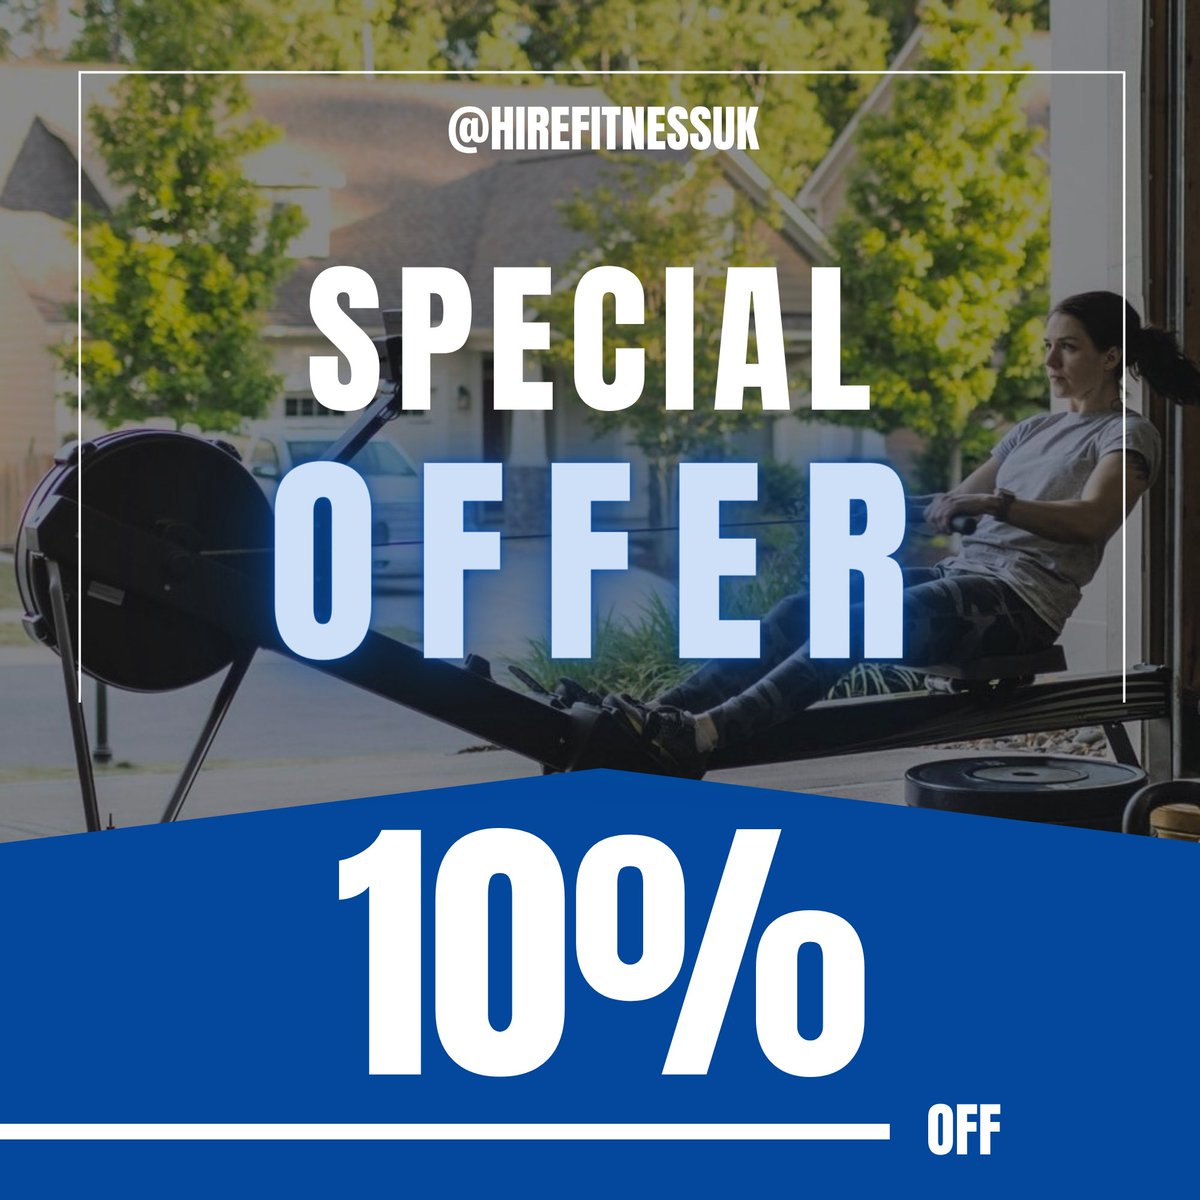 Want your exclusive 10% off discount code off all fitness equipment?
Simply ❤️LIKE this post and FOLLOW us @hirefitnessuk 
⬇️Comment ‘DONE’ below when you’ve liked and followed, and you’ll receive your discount code by DM!

#fitnessequipment #discountcode #discountcodeuk